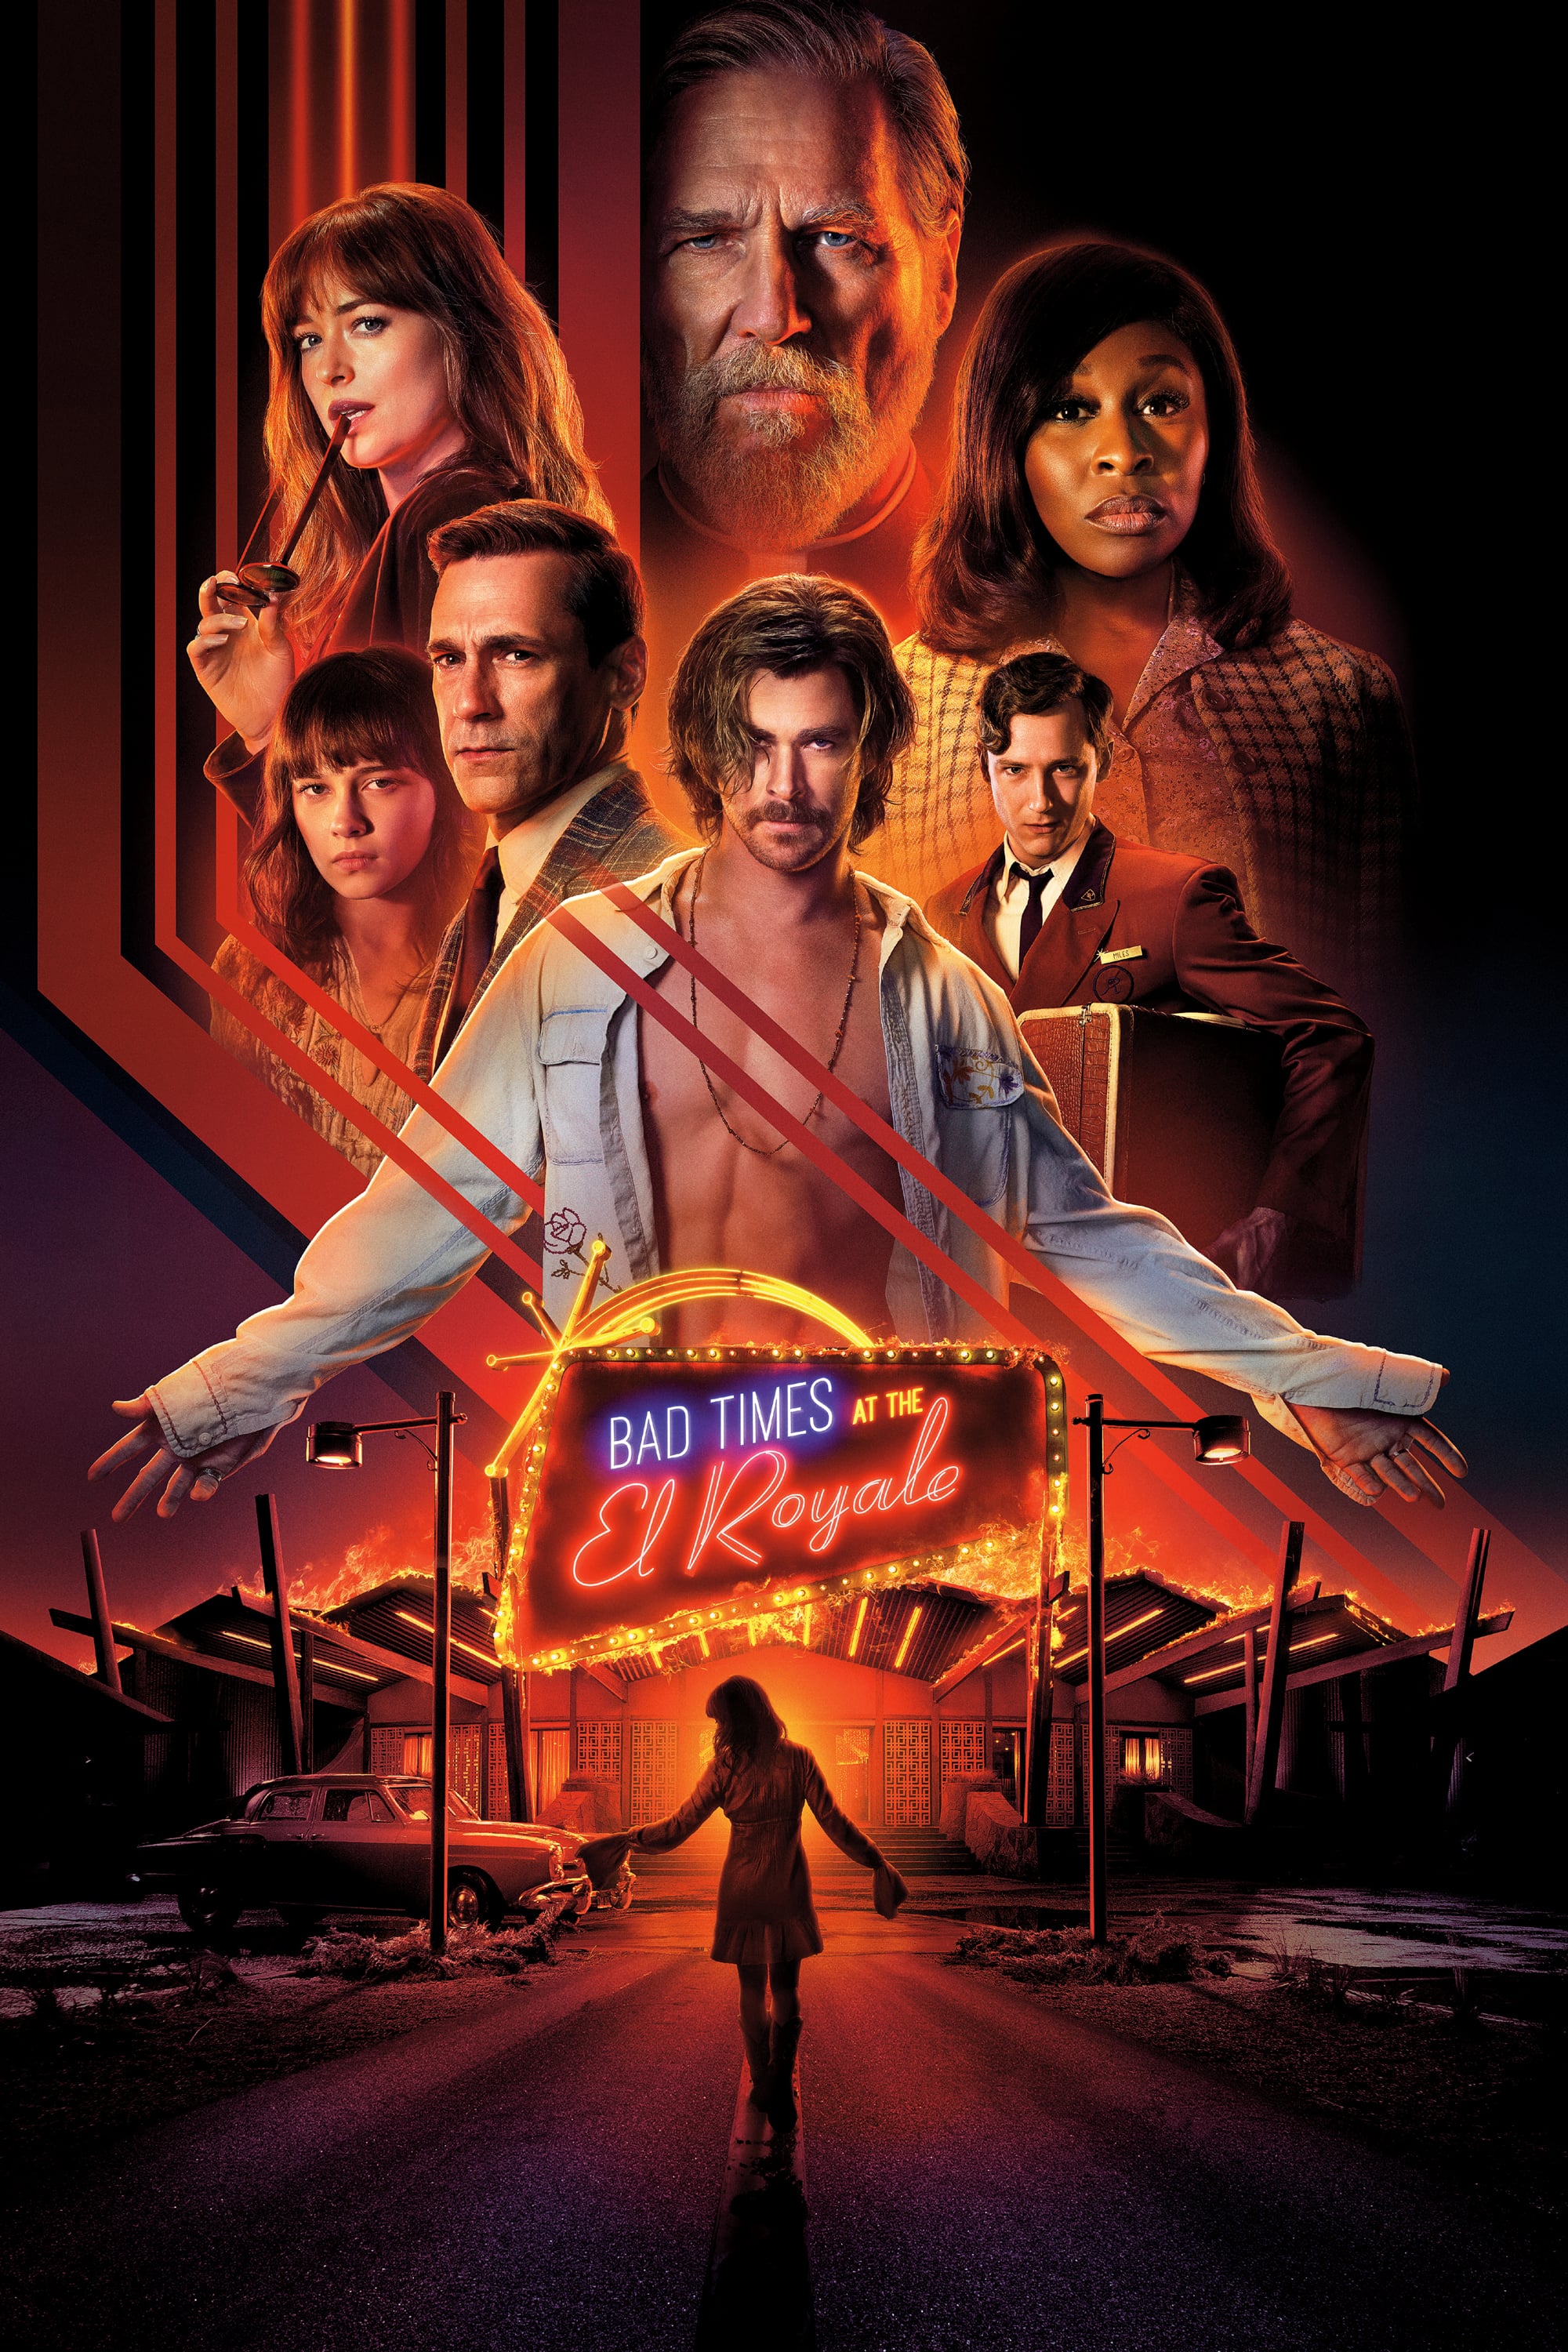 Bad Times at the El Royale (2018) Official Trailer #1